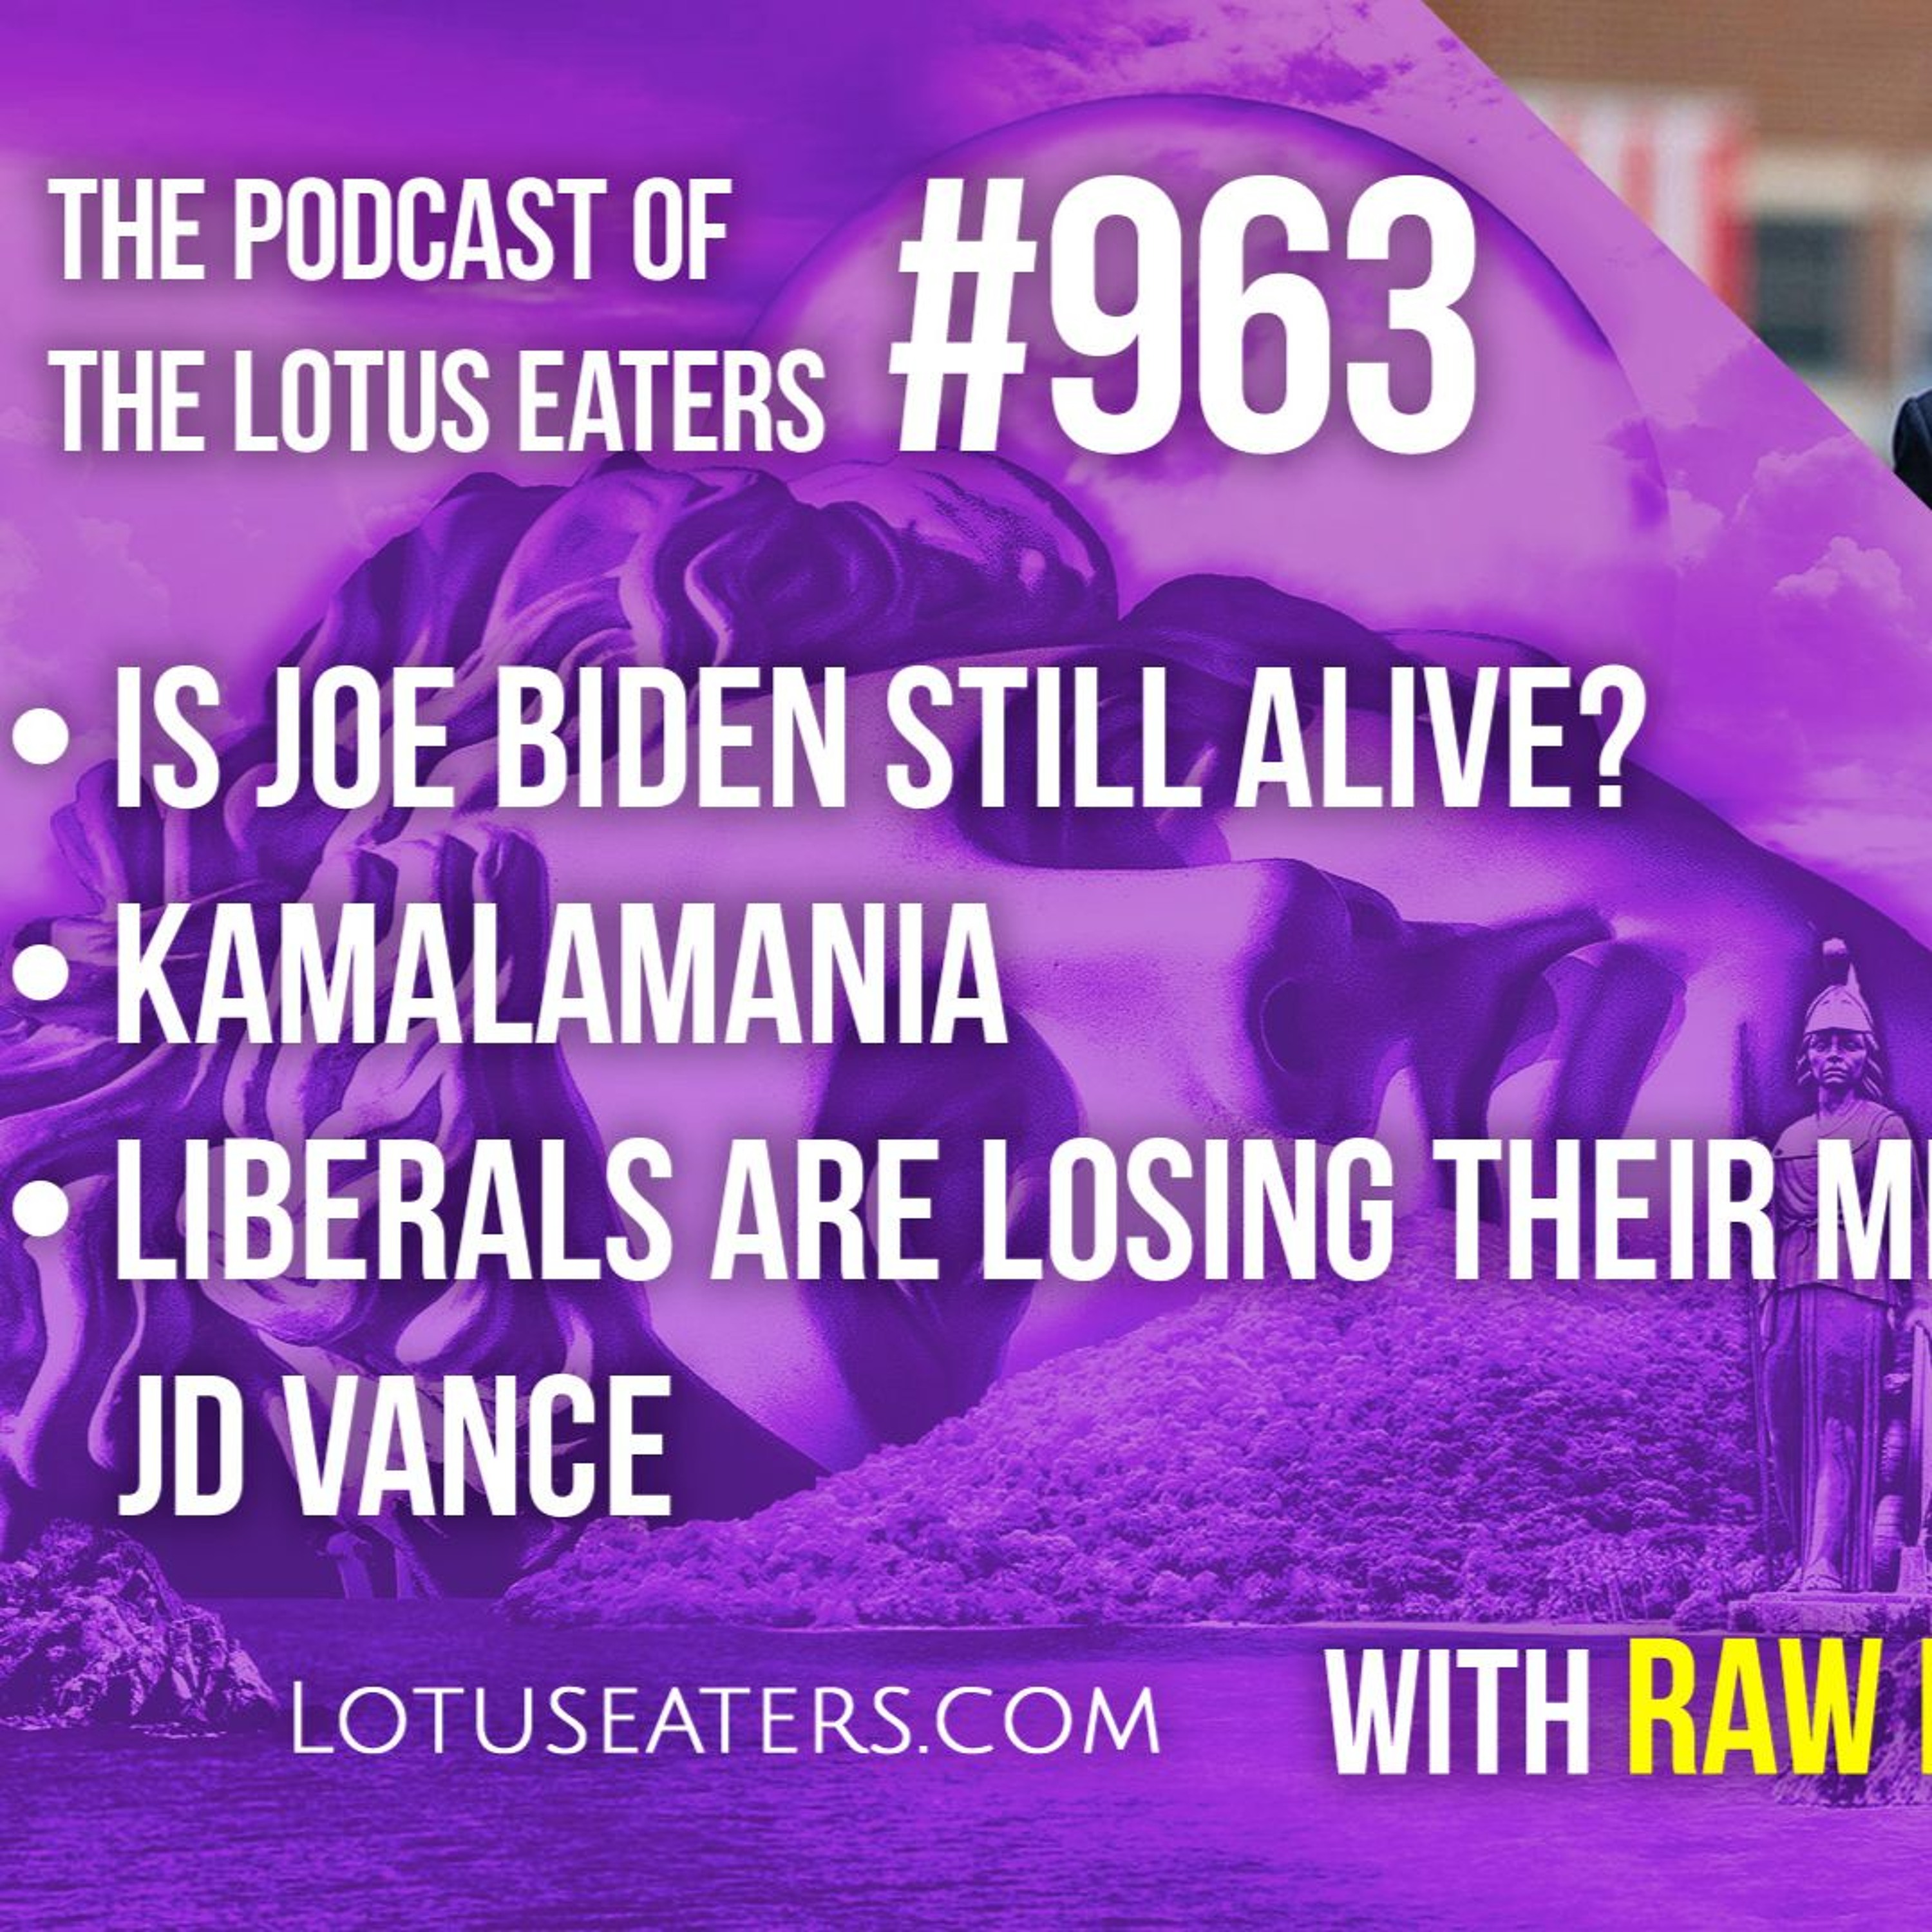 The Podcast of the Lotus Eaters #963